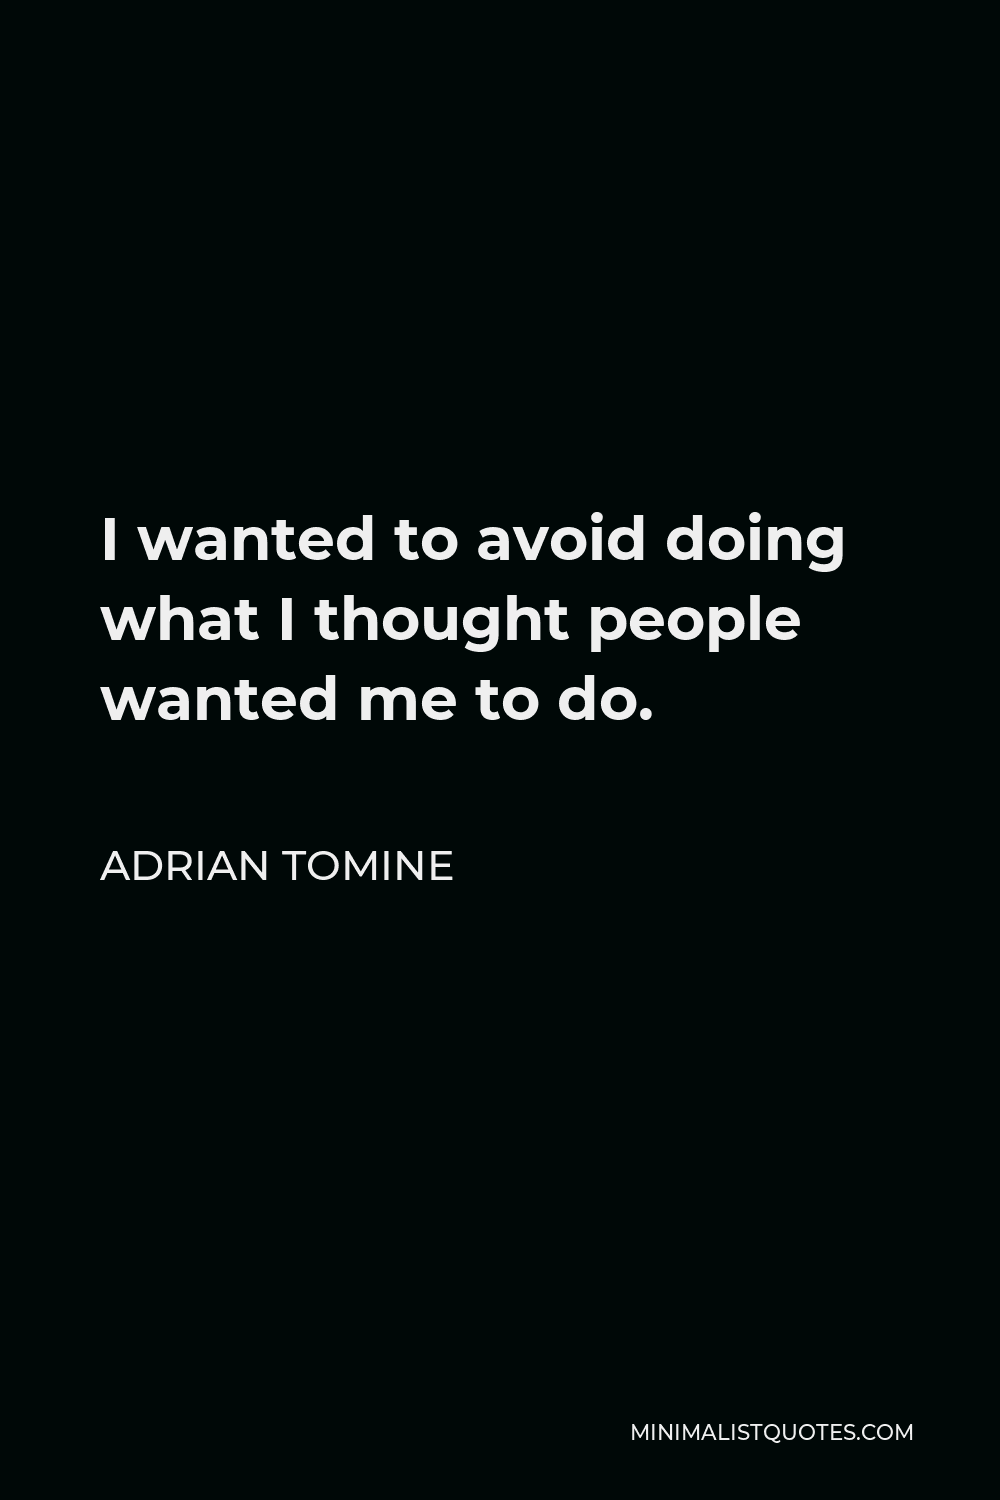 Adrian Tomine Quote - I wanted to avoid doing what I thought people wanted me to do.